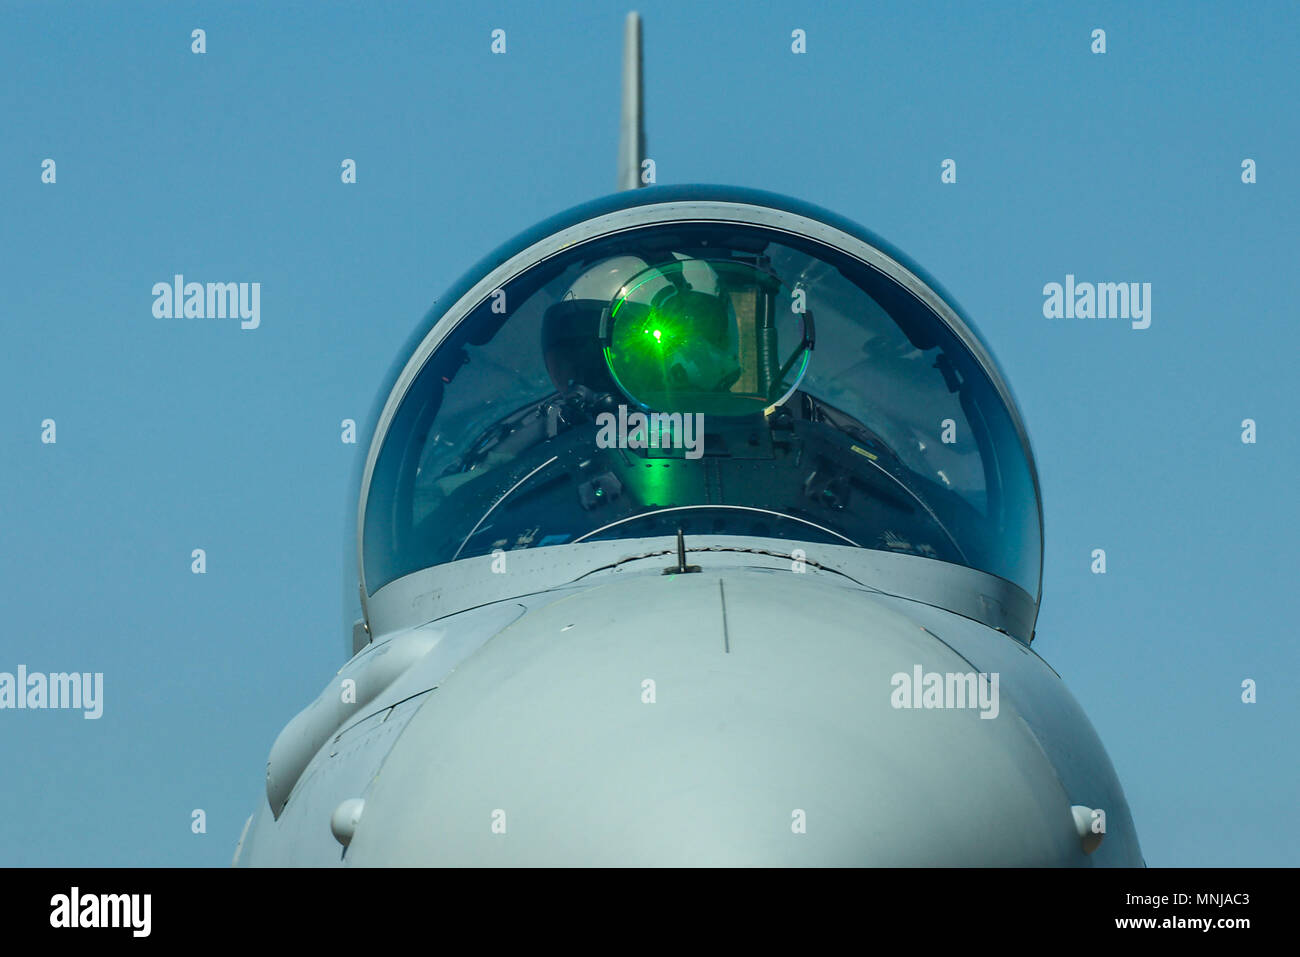 Fighter pilot. Royal Air Force RAF Eurofighter Typhoon pilot with green light effects from the head up display hud glass. Cockpit canopy. Jet plane Stock Photo